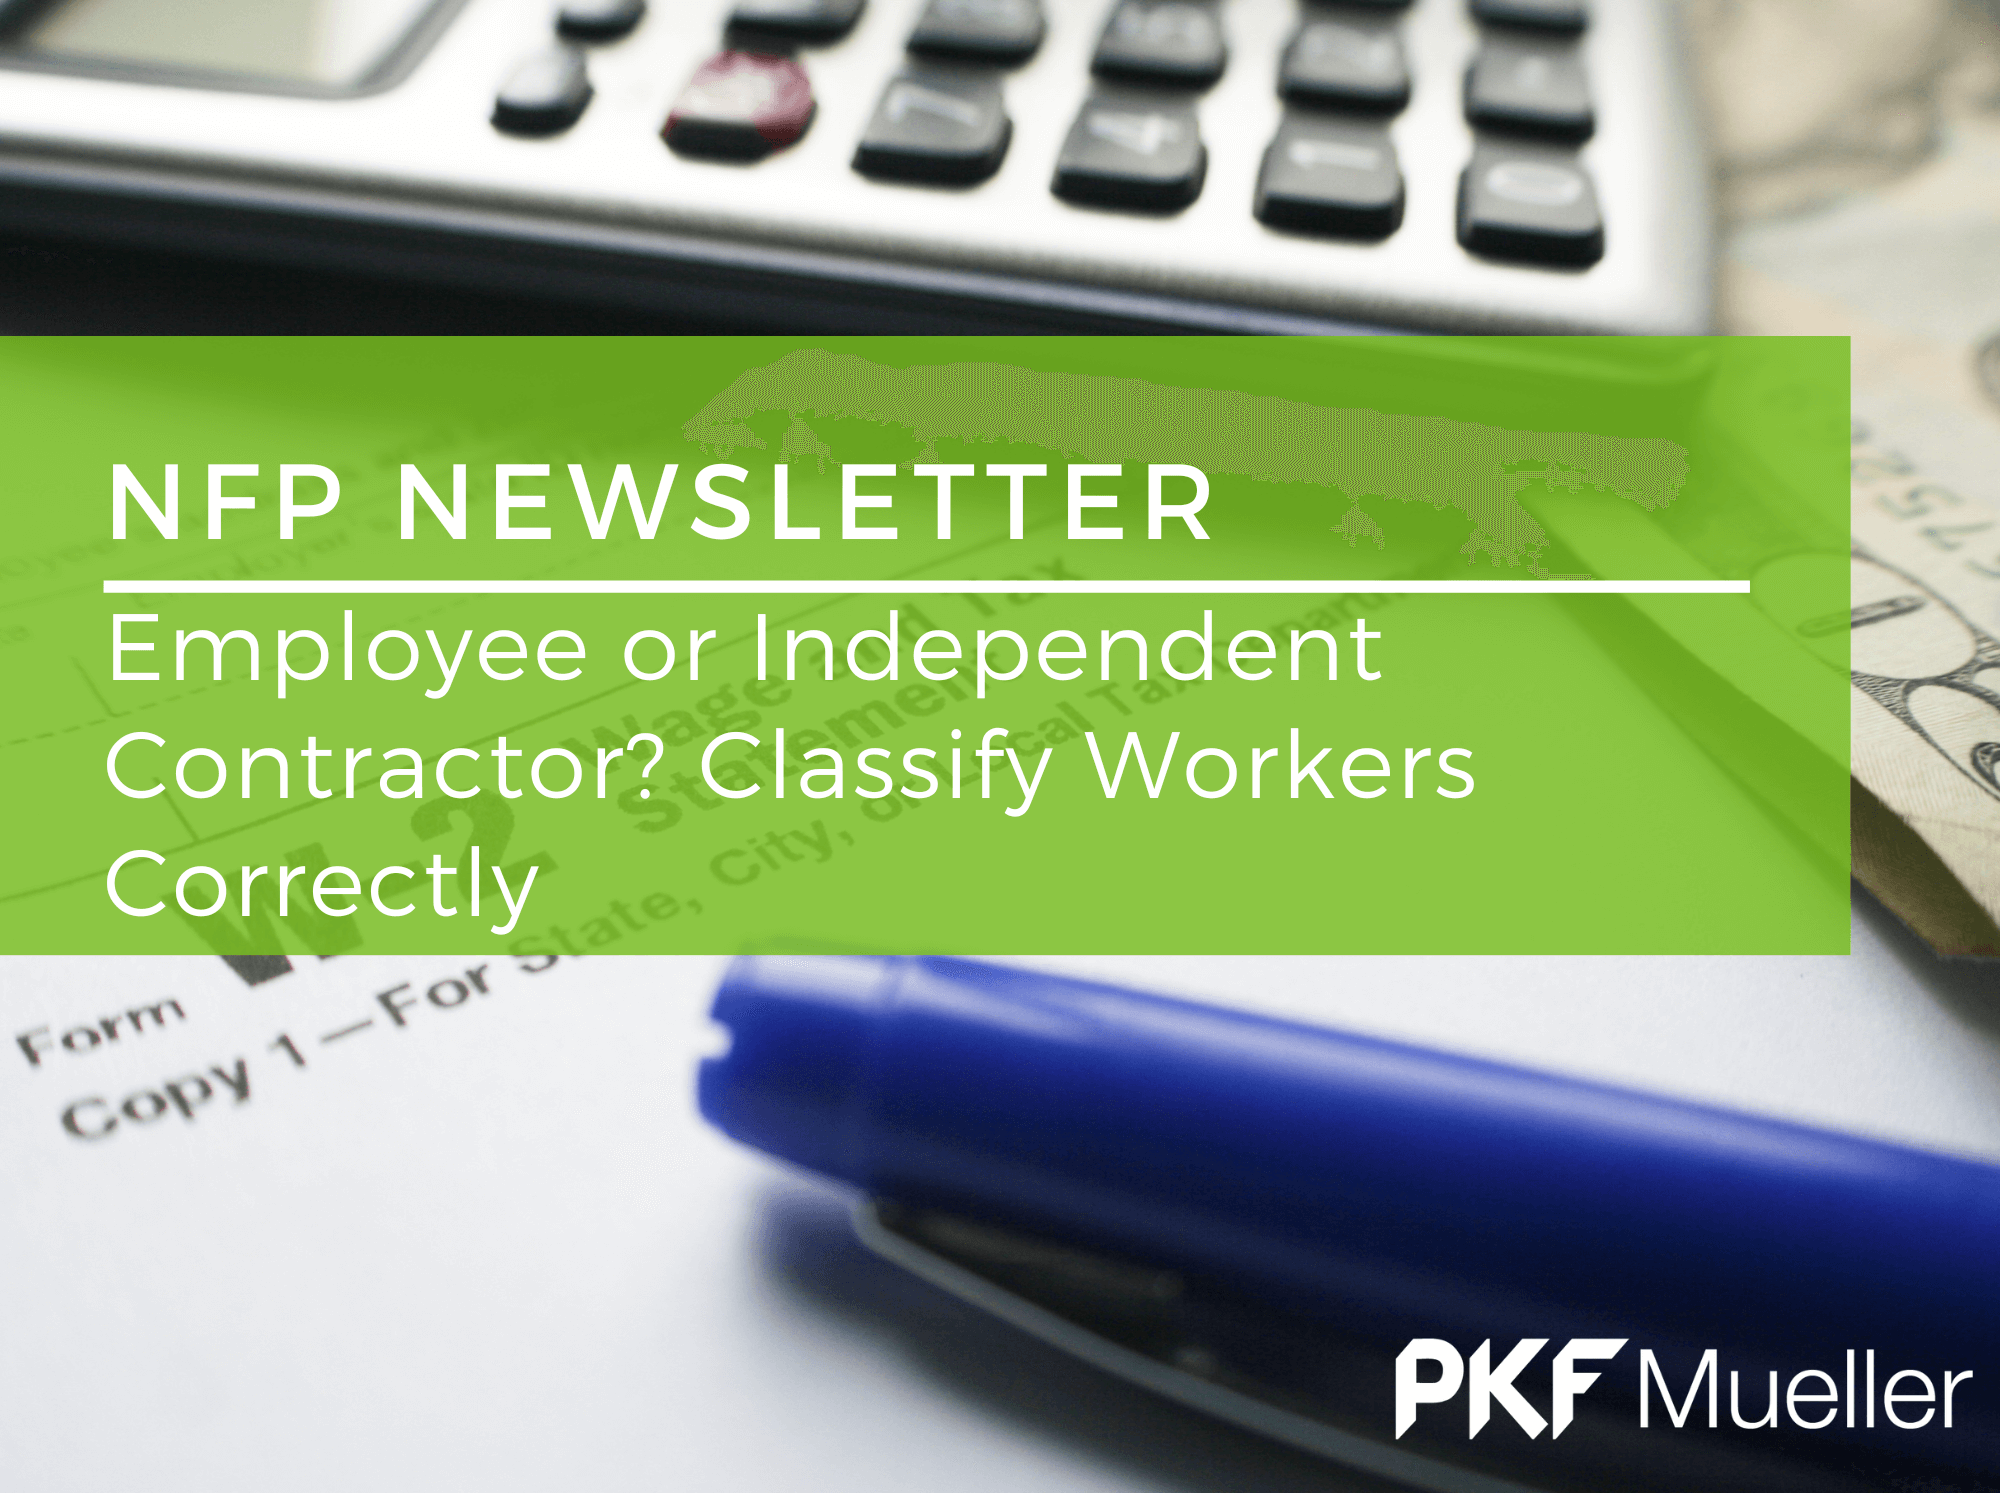 Employee or Independent Contractor? Classify Workers Correctly